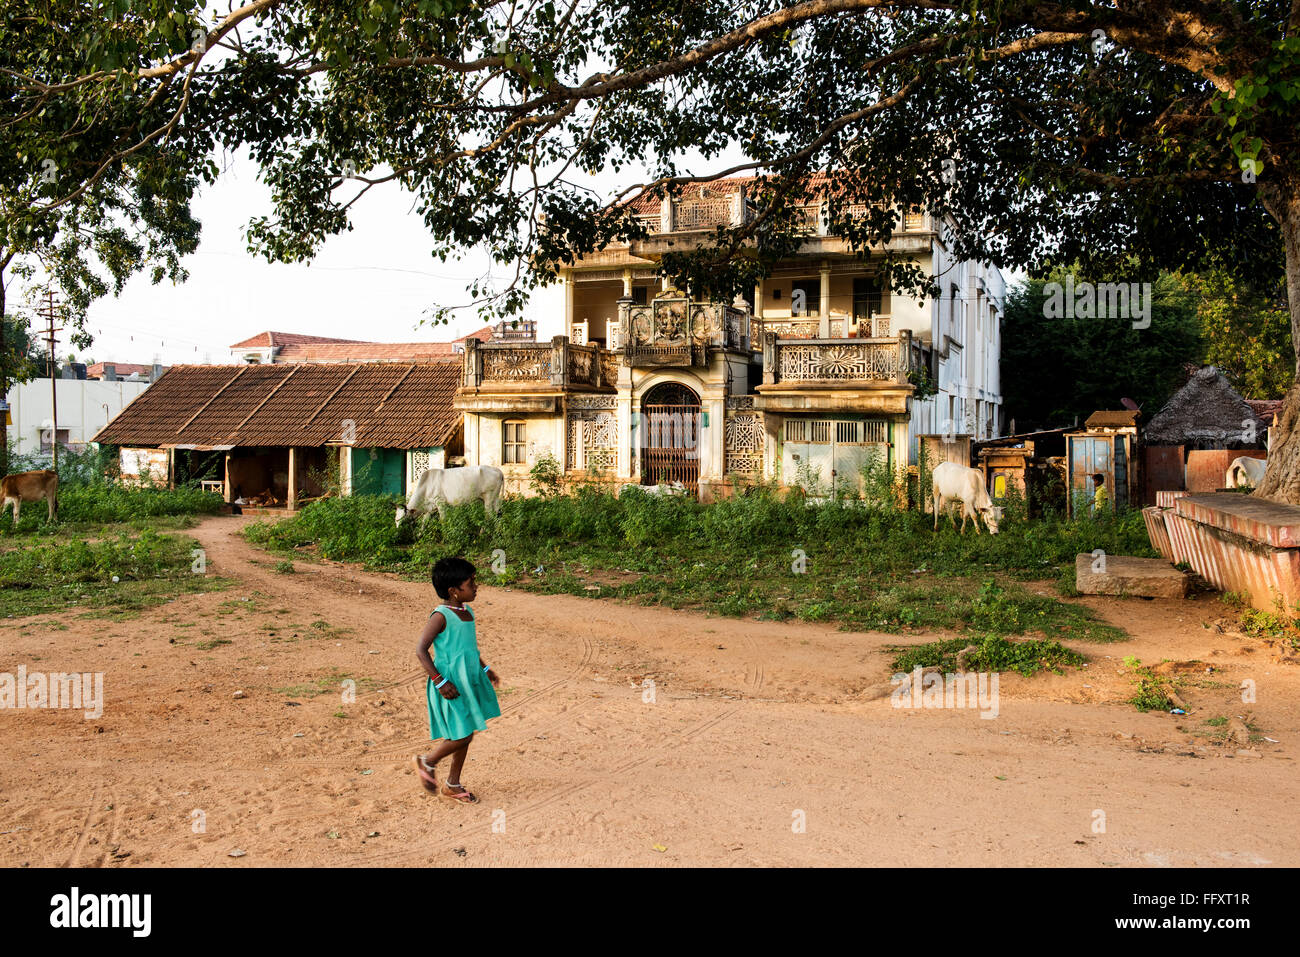 A young Indian girl walks past a merchants house in the village of Kundrikudy near Chettinad, Tamil Nadu, India Asia Stock Photo